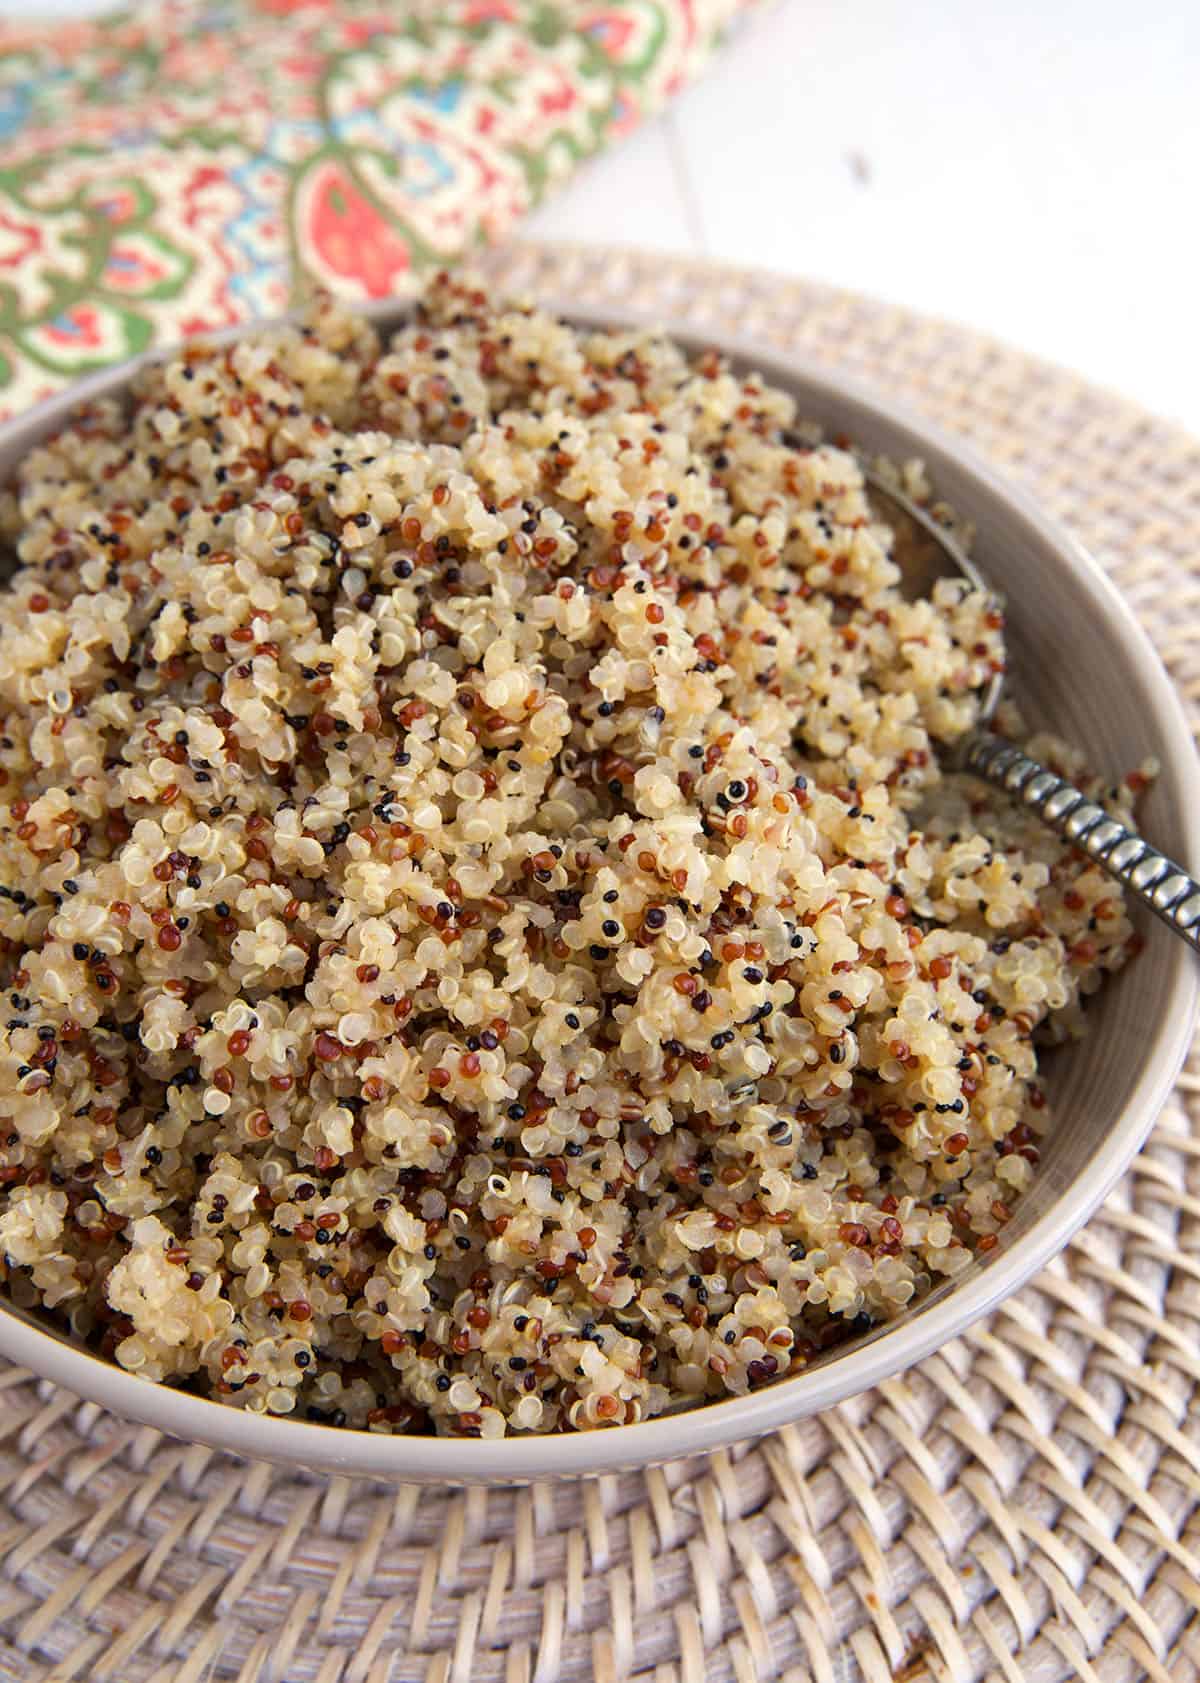 A spoon is placed in a bowl filled with quinoa. 